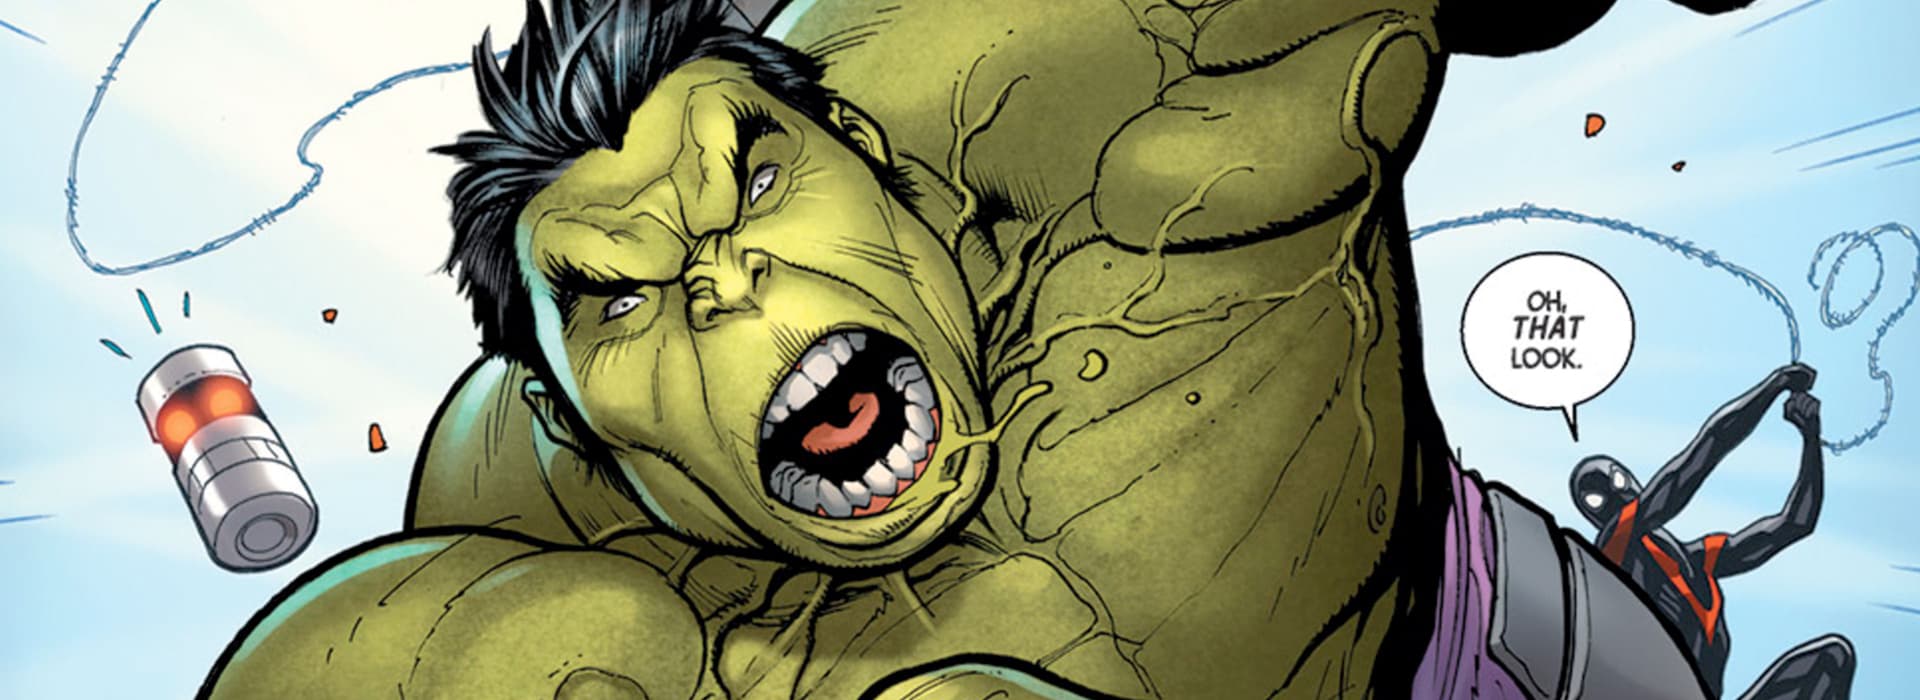 Amadeus Cho In Comics Full Report Page Divider